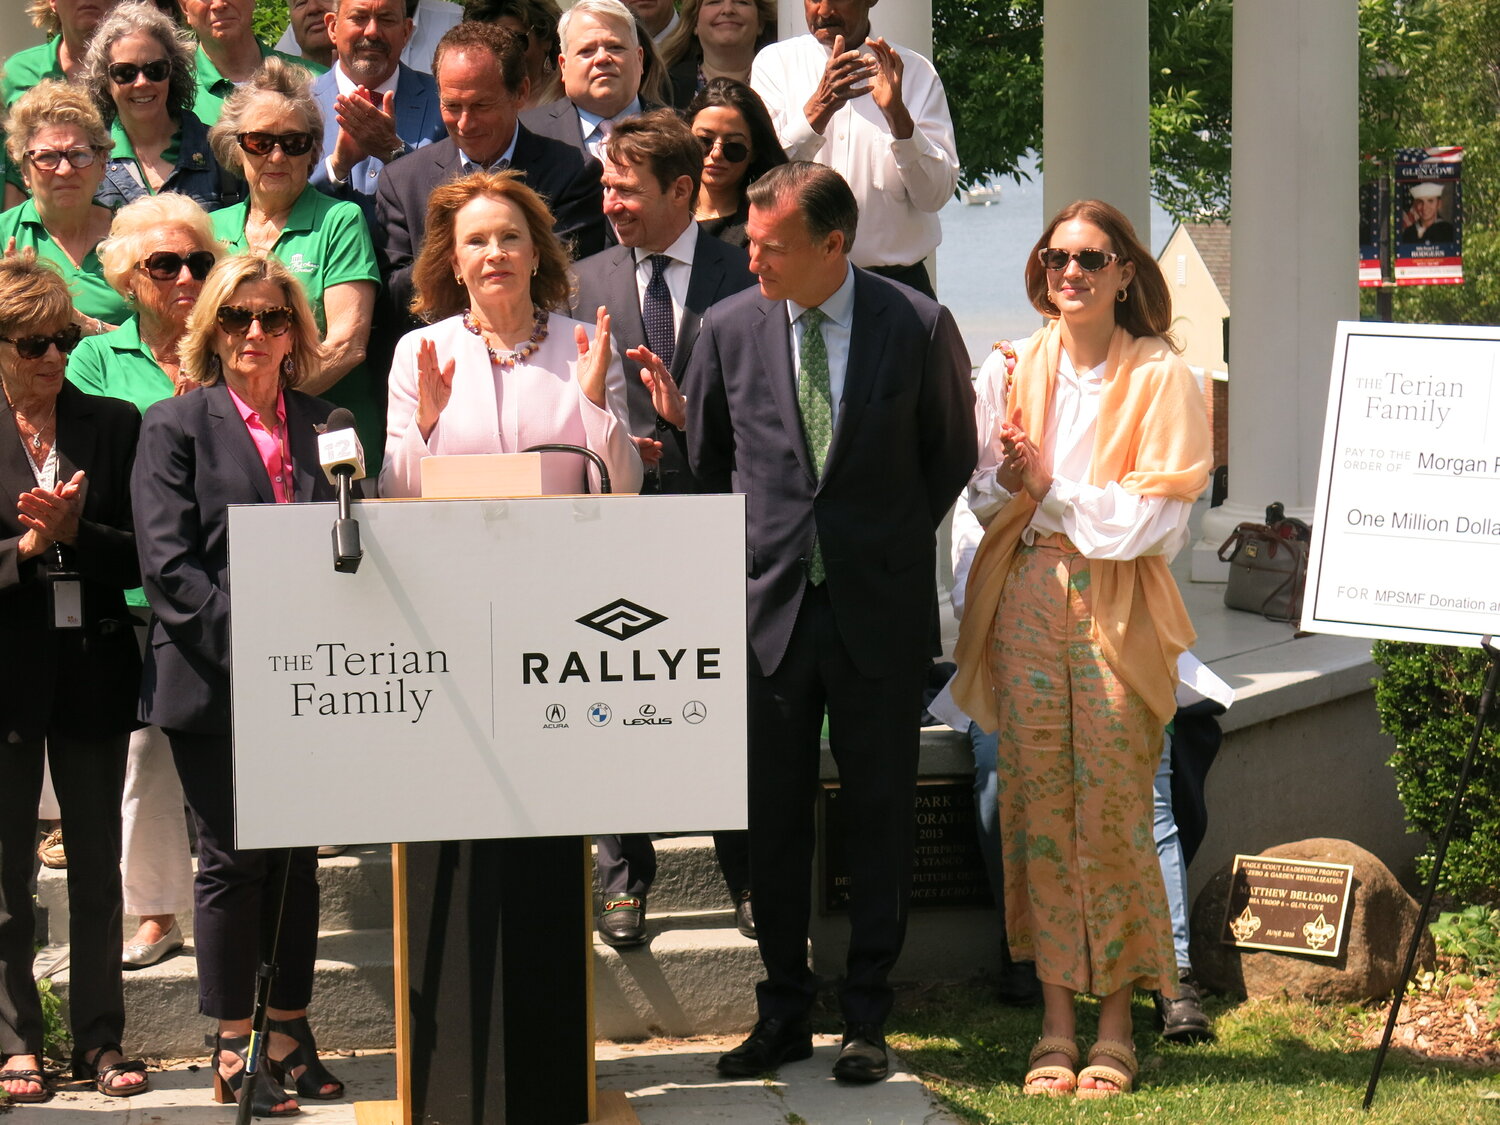 Juliana Terian, president, CEO of Rallye Motor Company, center, has given the Morgan Summer Music Festival a $1 million donation and sponsorship. Former Congressman Tom Suozzi, second from right, arranged for a news conference on to celebrate the generosity of the Terian Family and Rallye Motor Company.